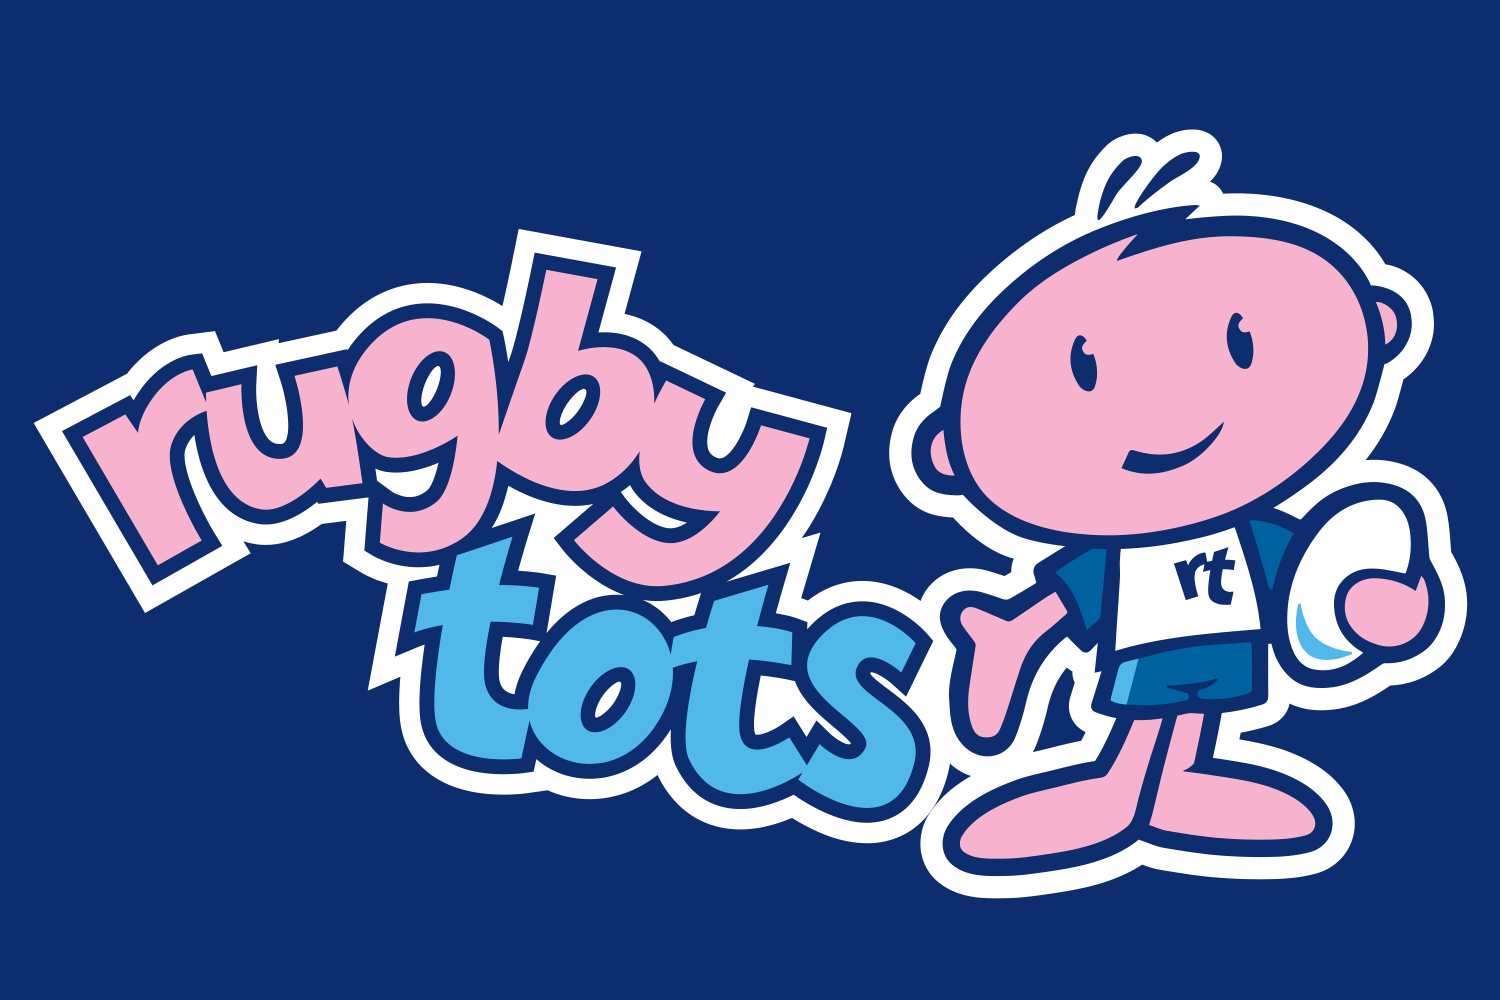 New Rugbytots logo